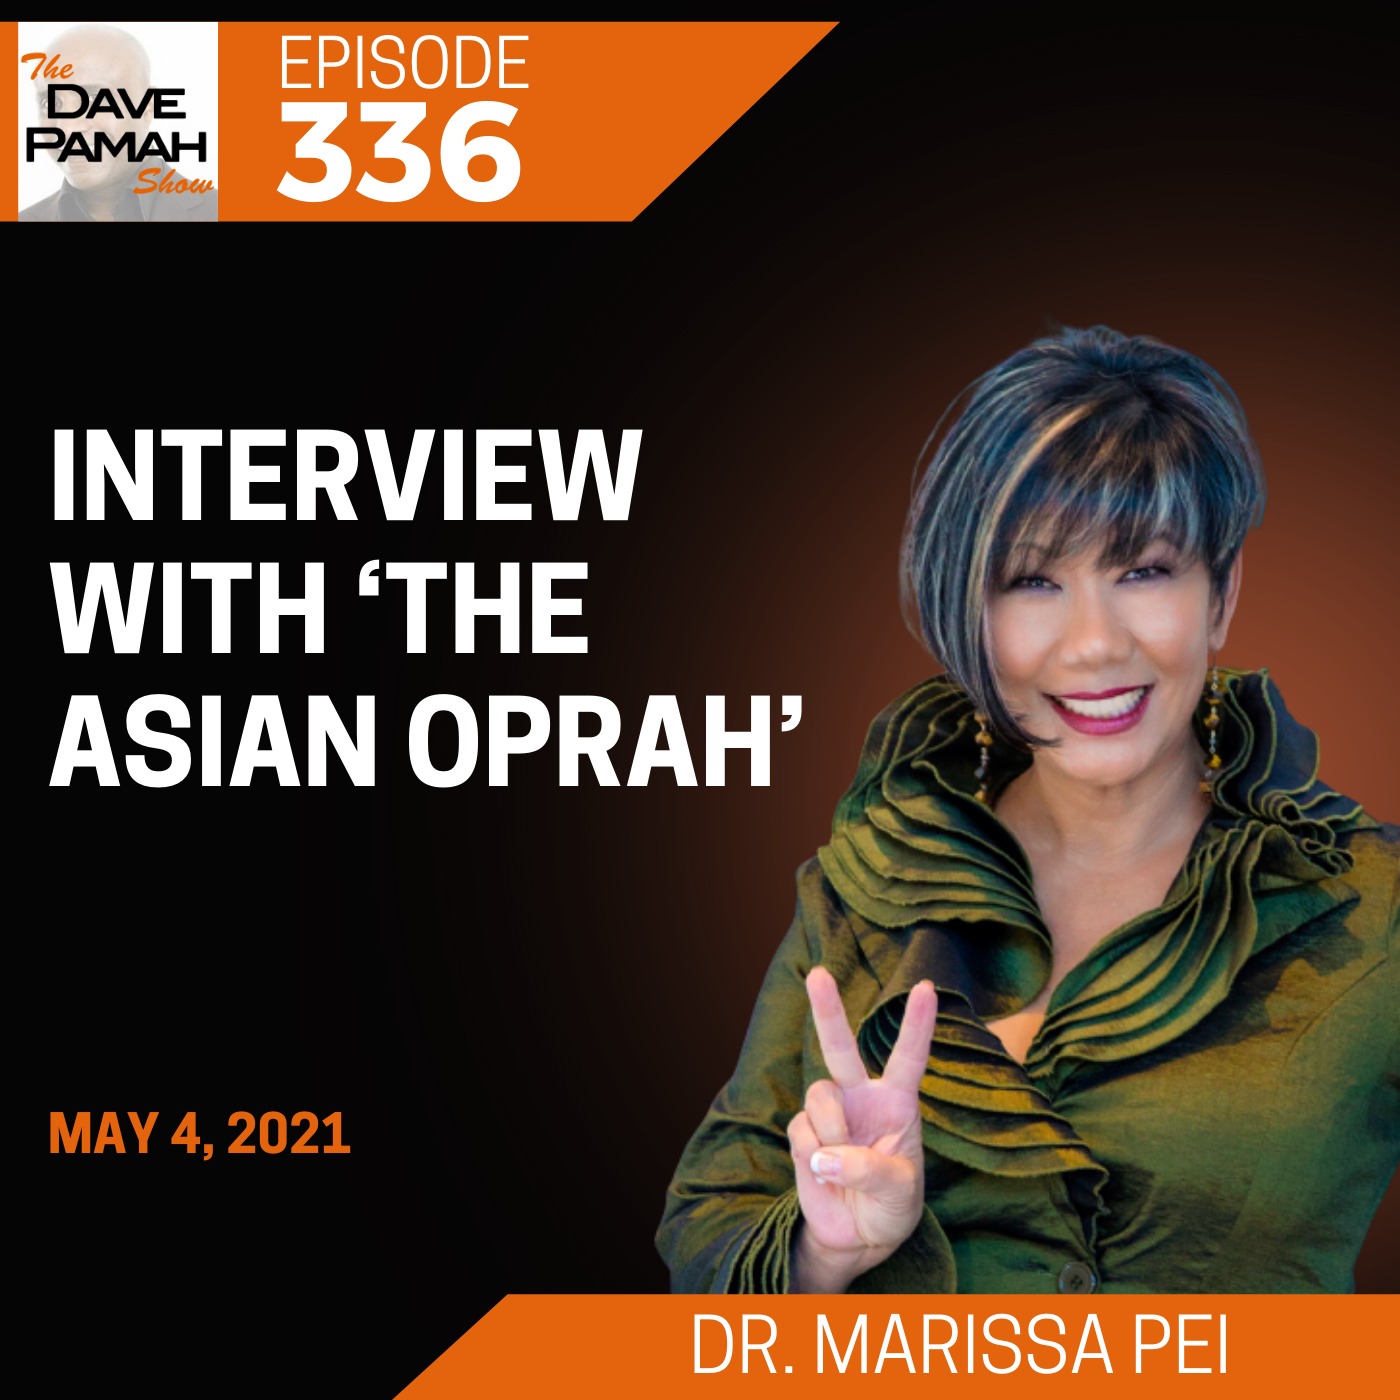 Interview with Dr. Marissa Pei aka ‘The Asian Oprah’